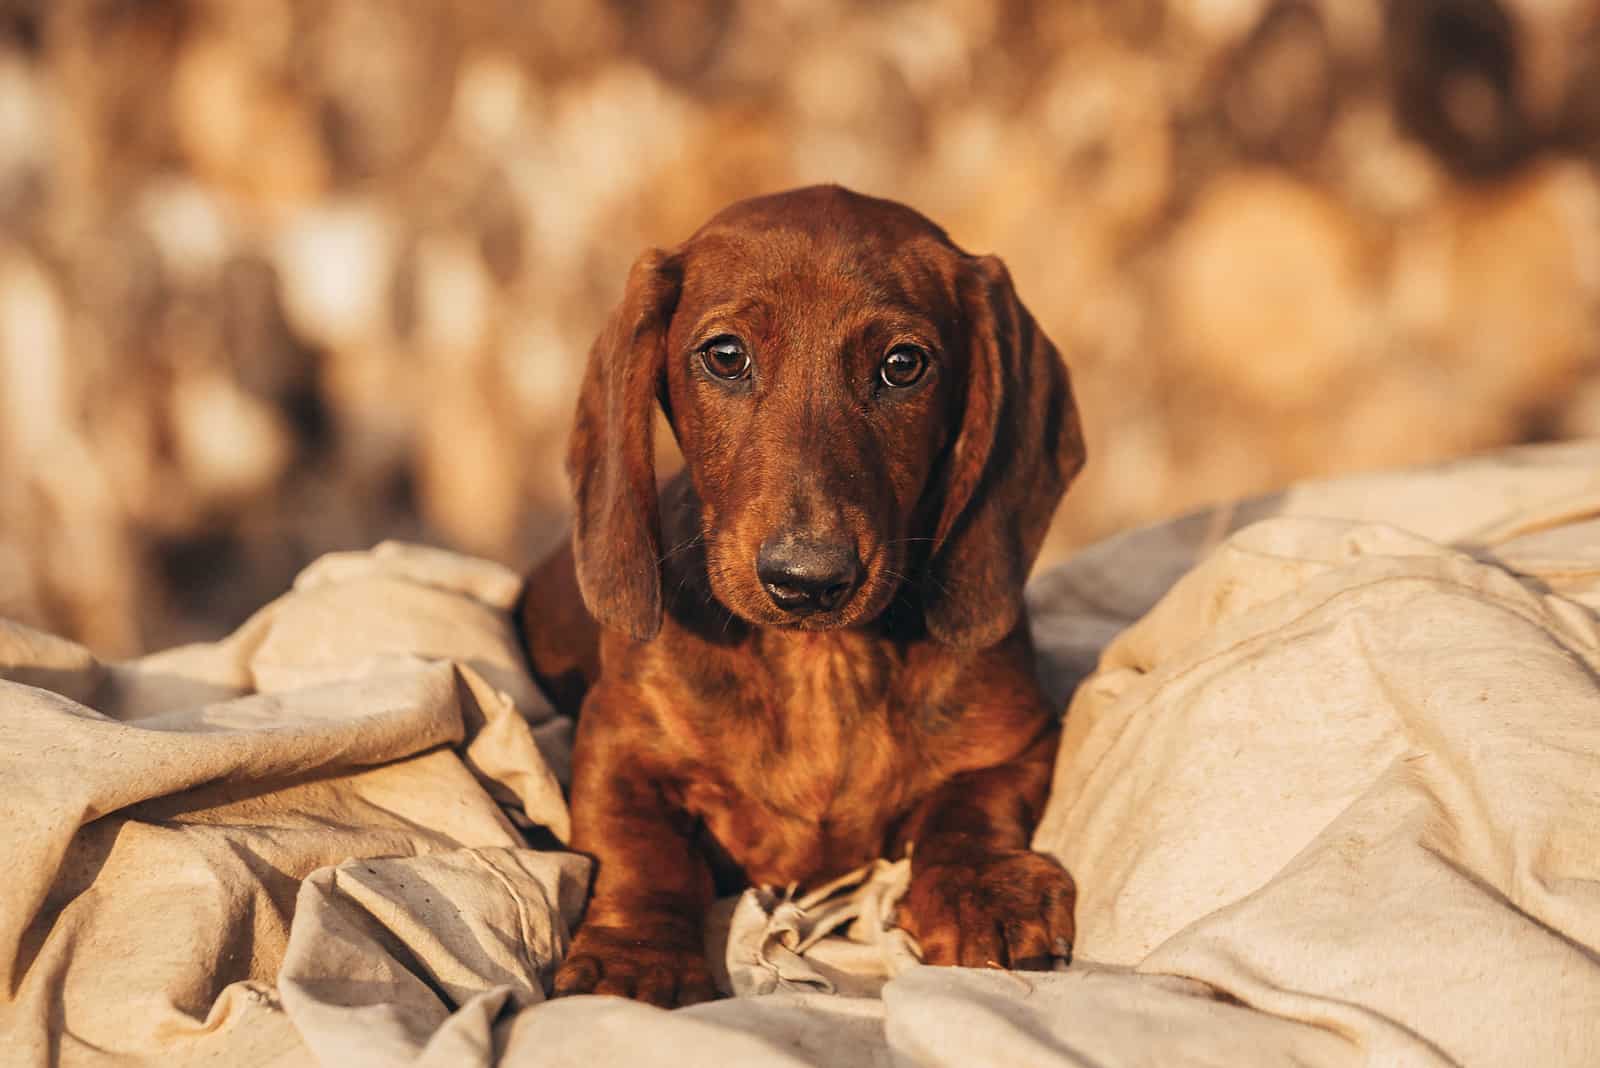 How Much Do Dachshunds Shed? Grooming And Care Overview